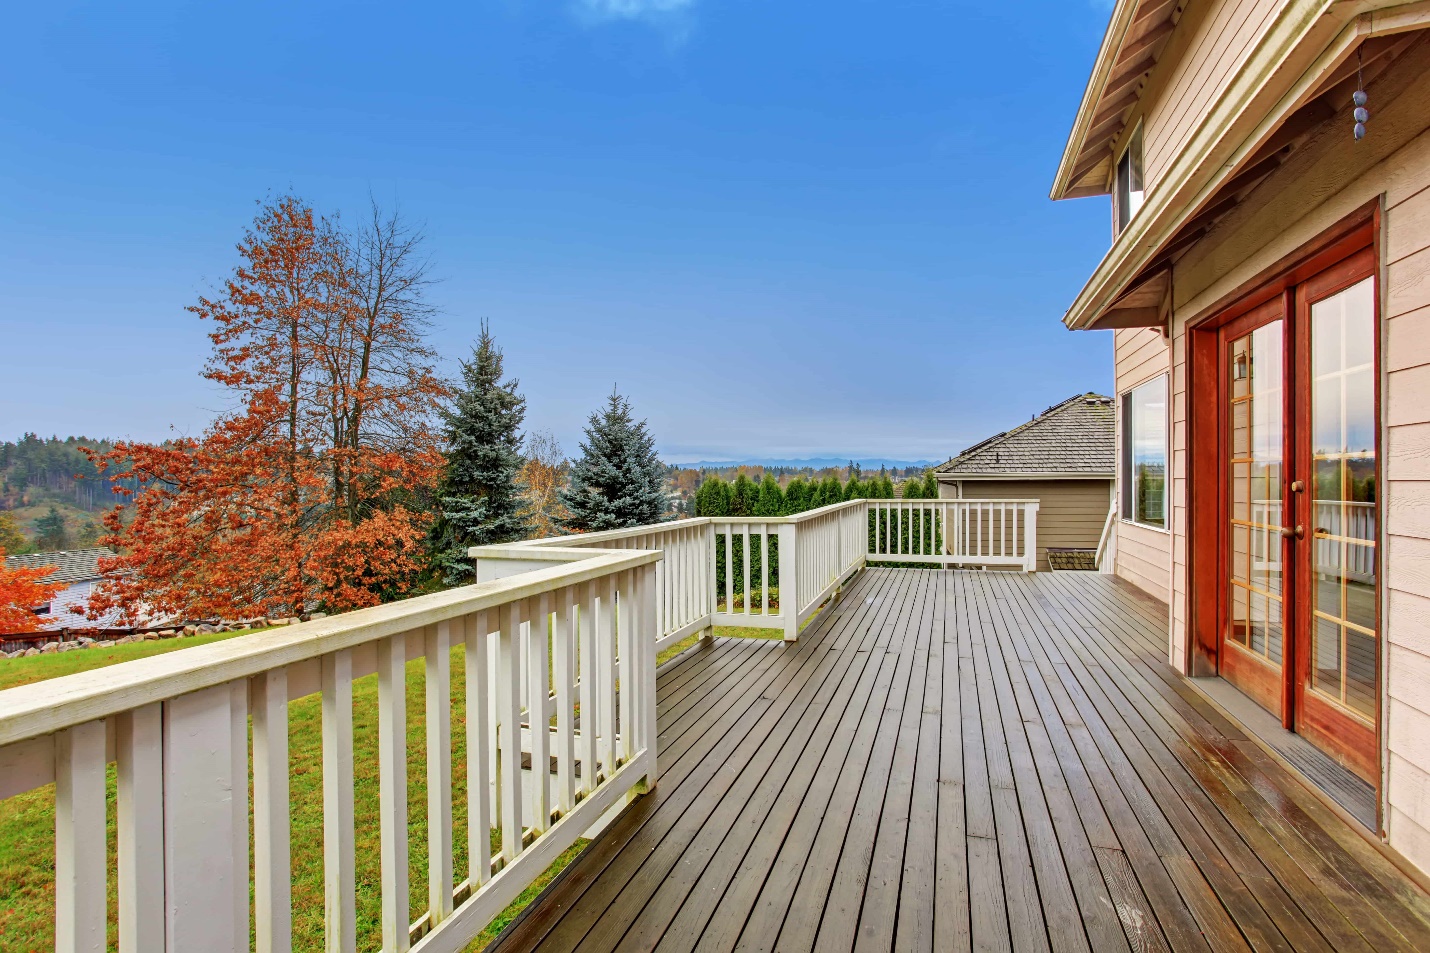 A deck with a white railing and trees in the background

Description automatically generated